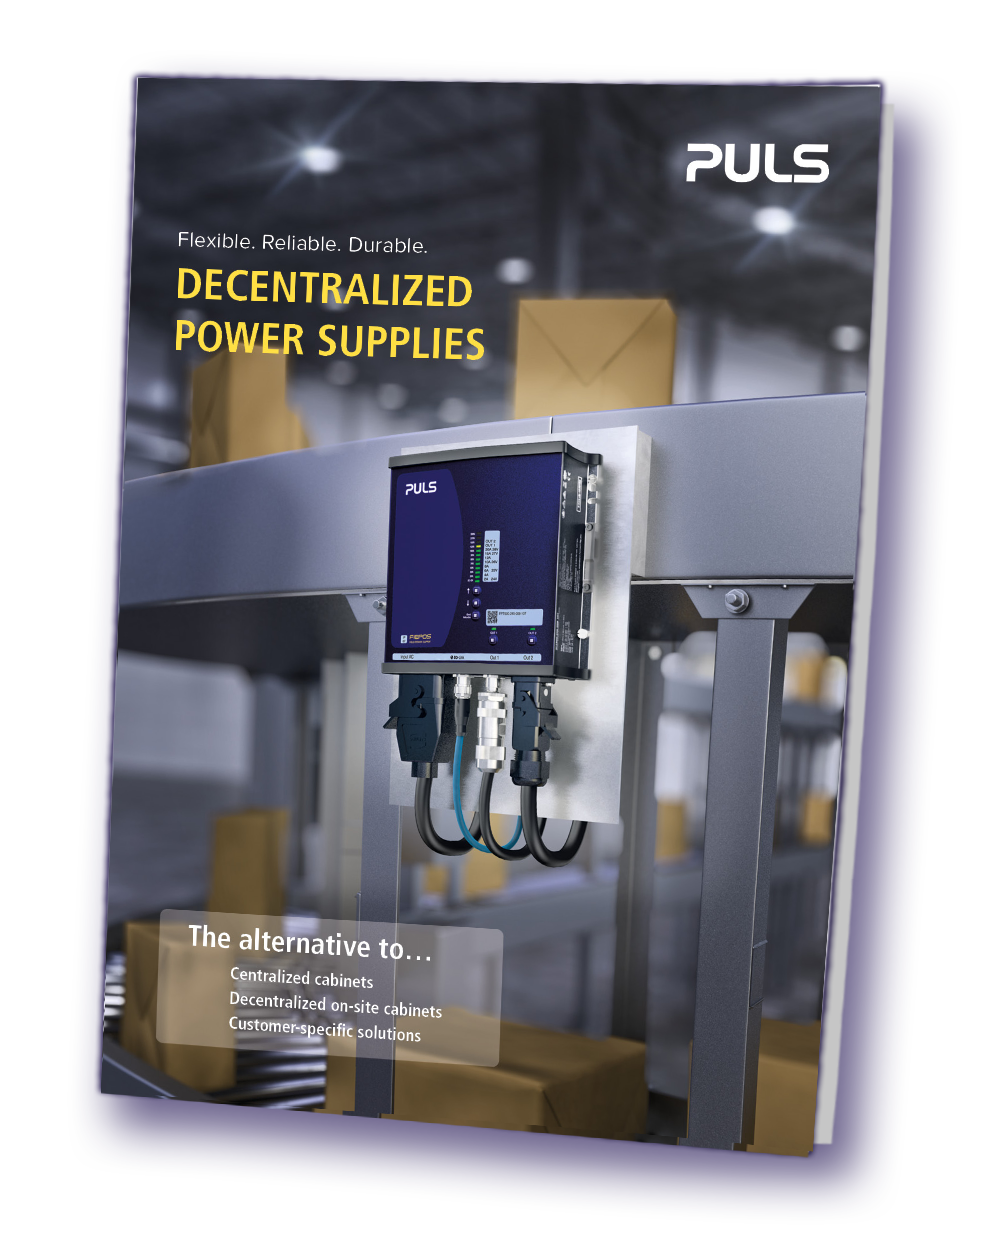 Learn more about our FIEPOS Field power supplies for decentralized applications.